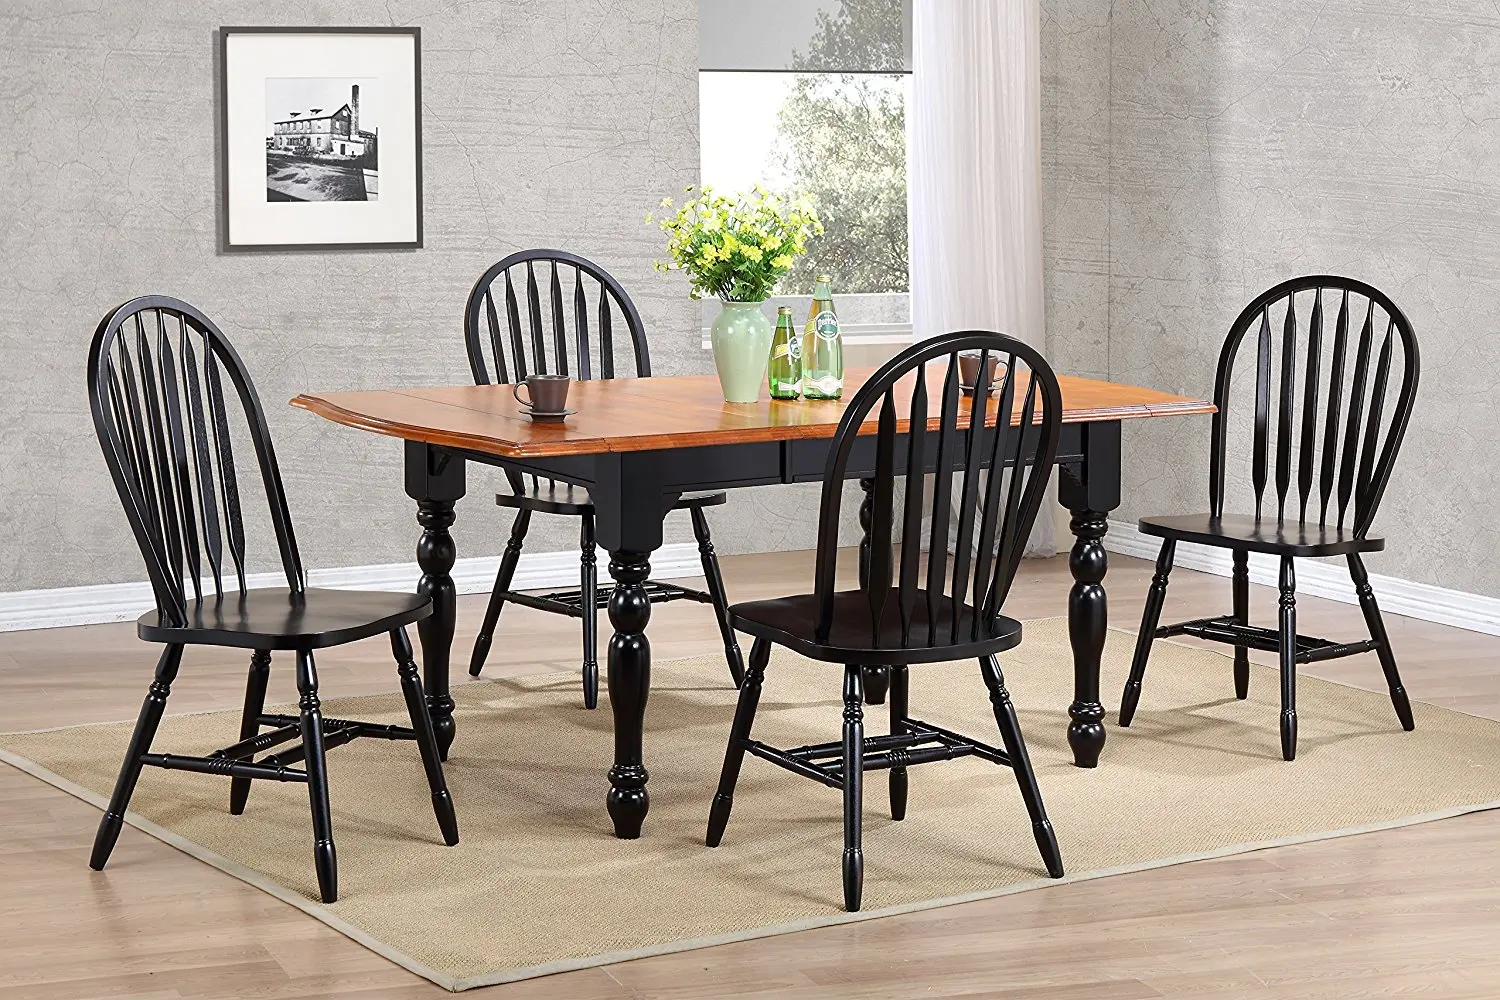 Cheap Extension Dining Table Set, find Extension Dining Table Set deals